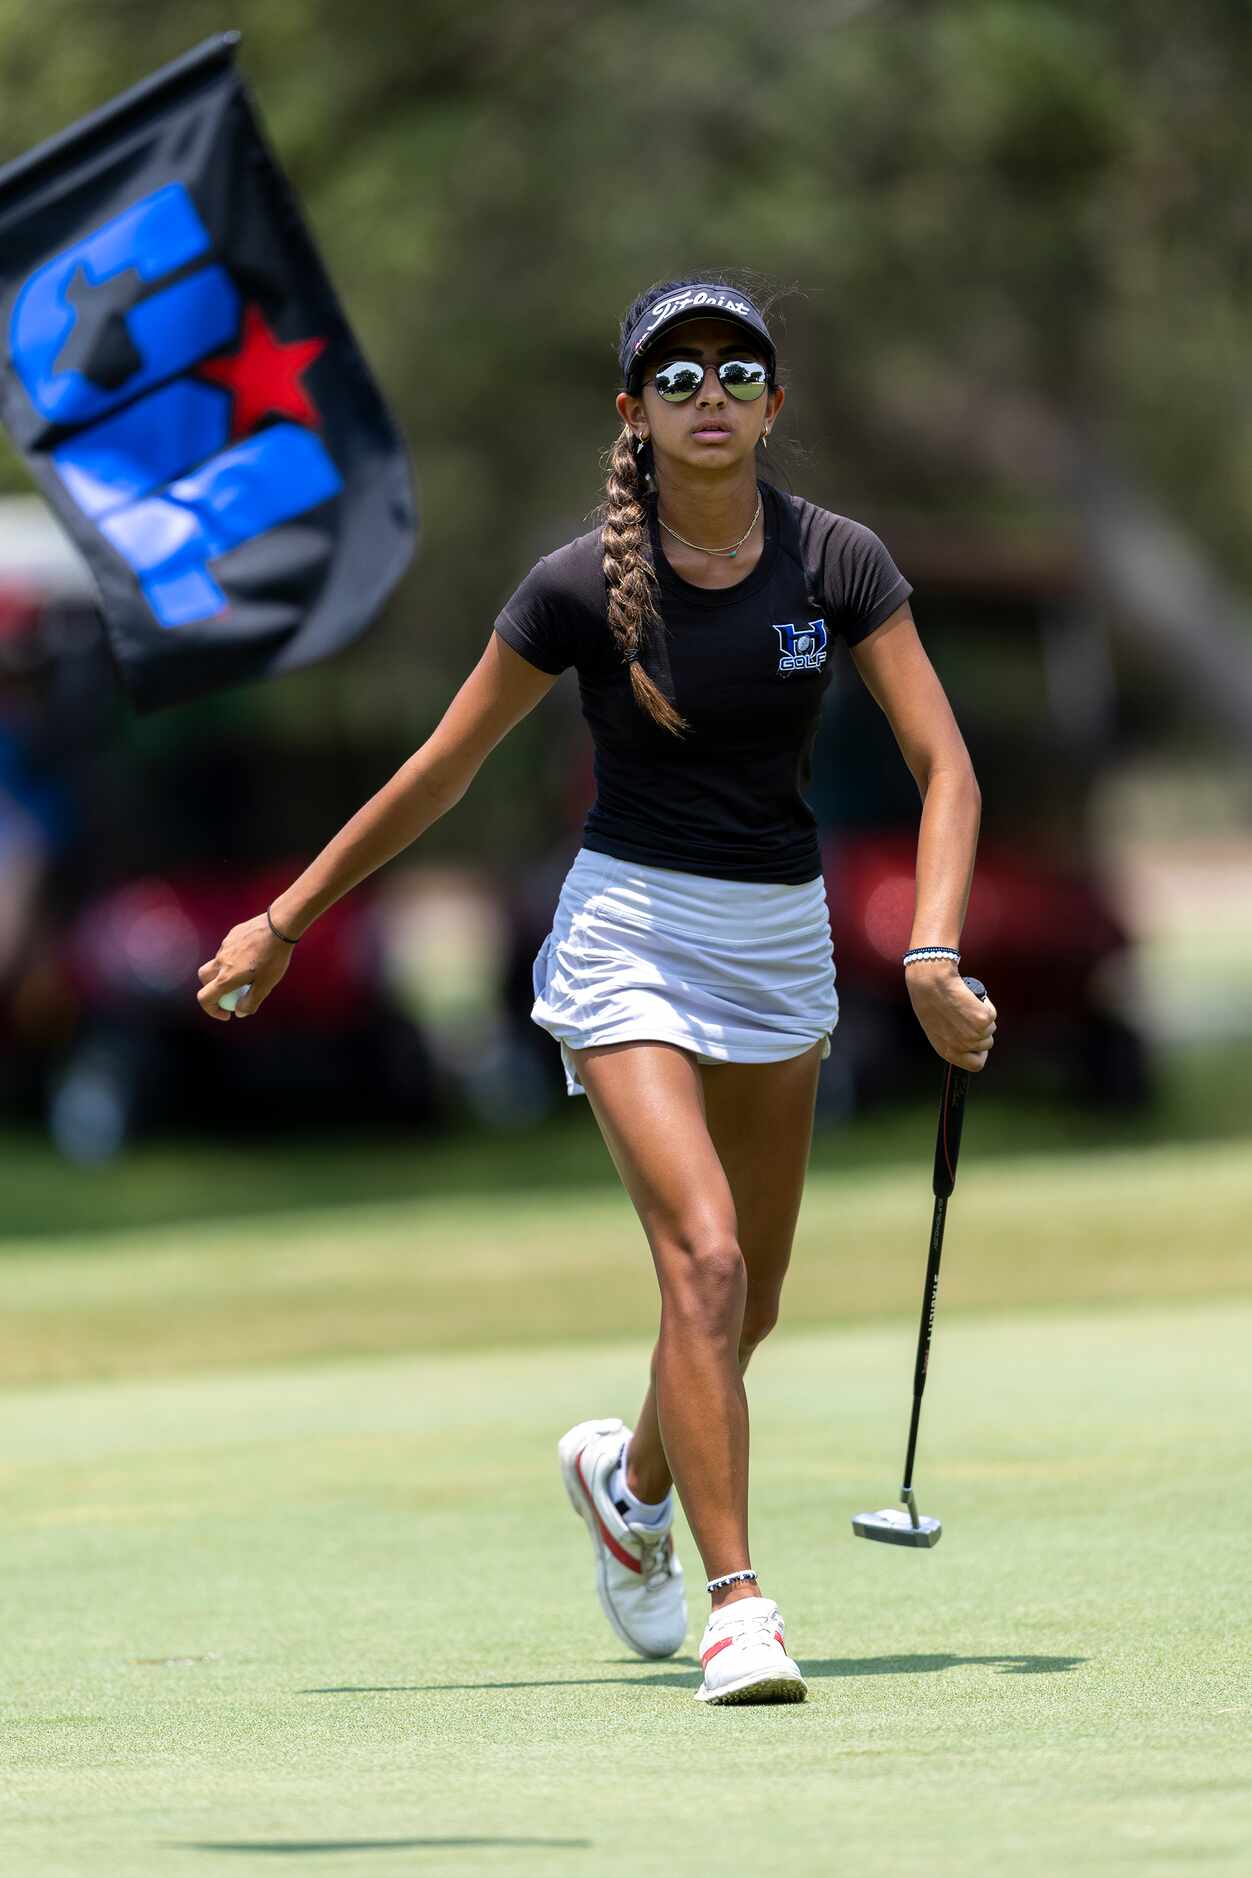 Hebron’s Symran Shah exits the 9th green during the 6A girls state golf tournament in...